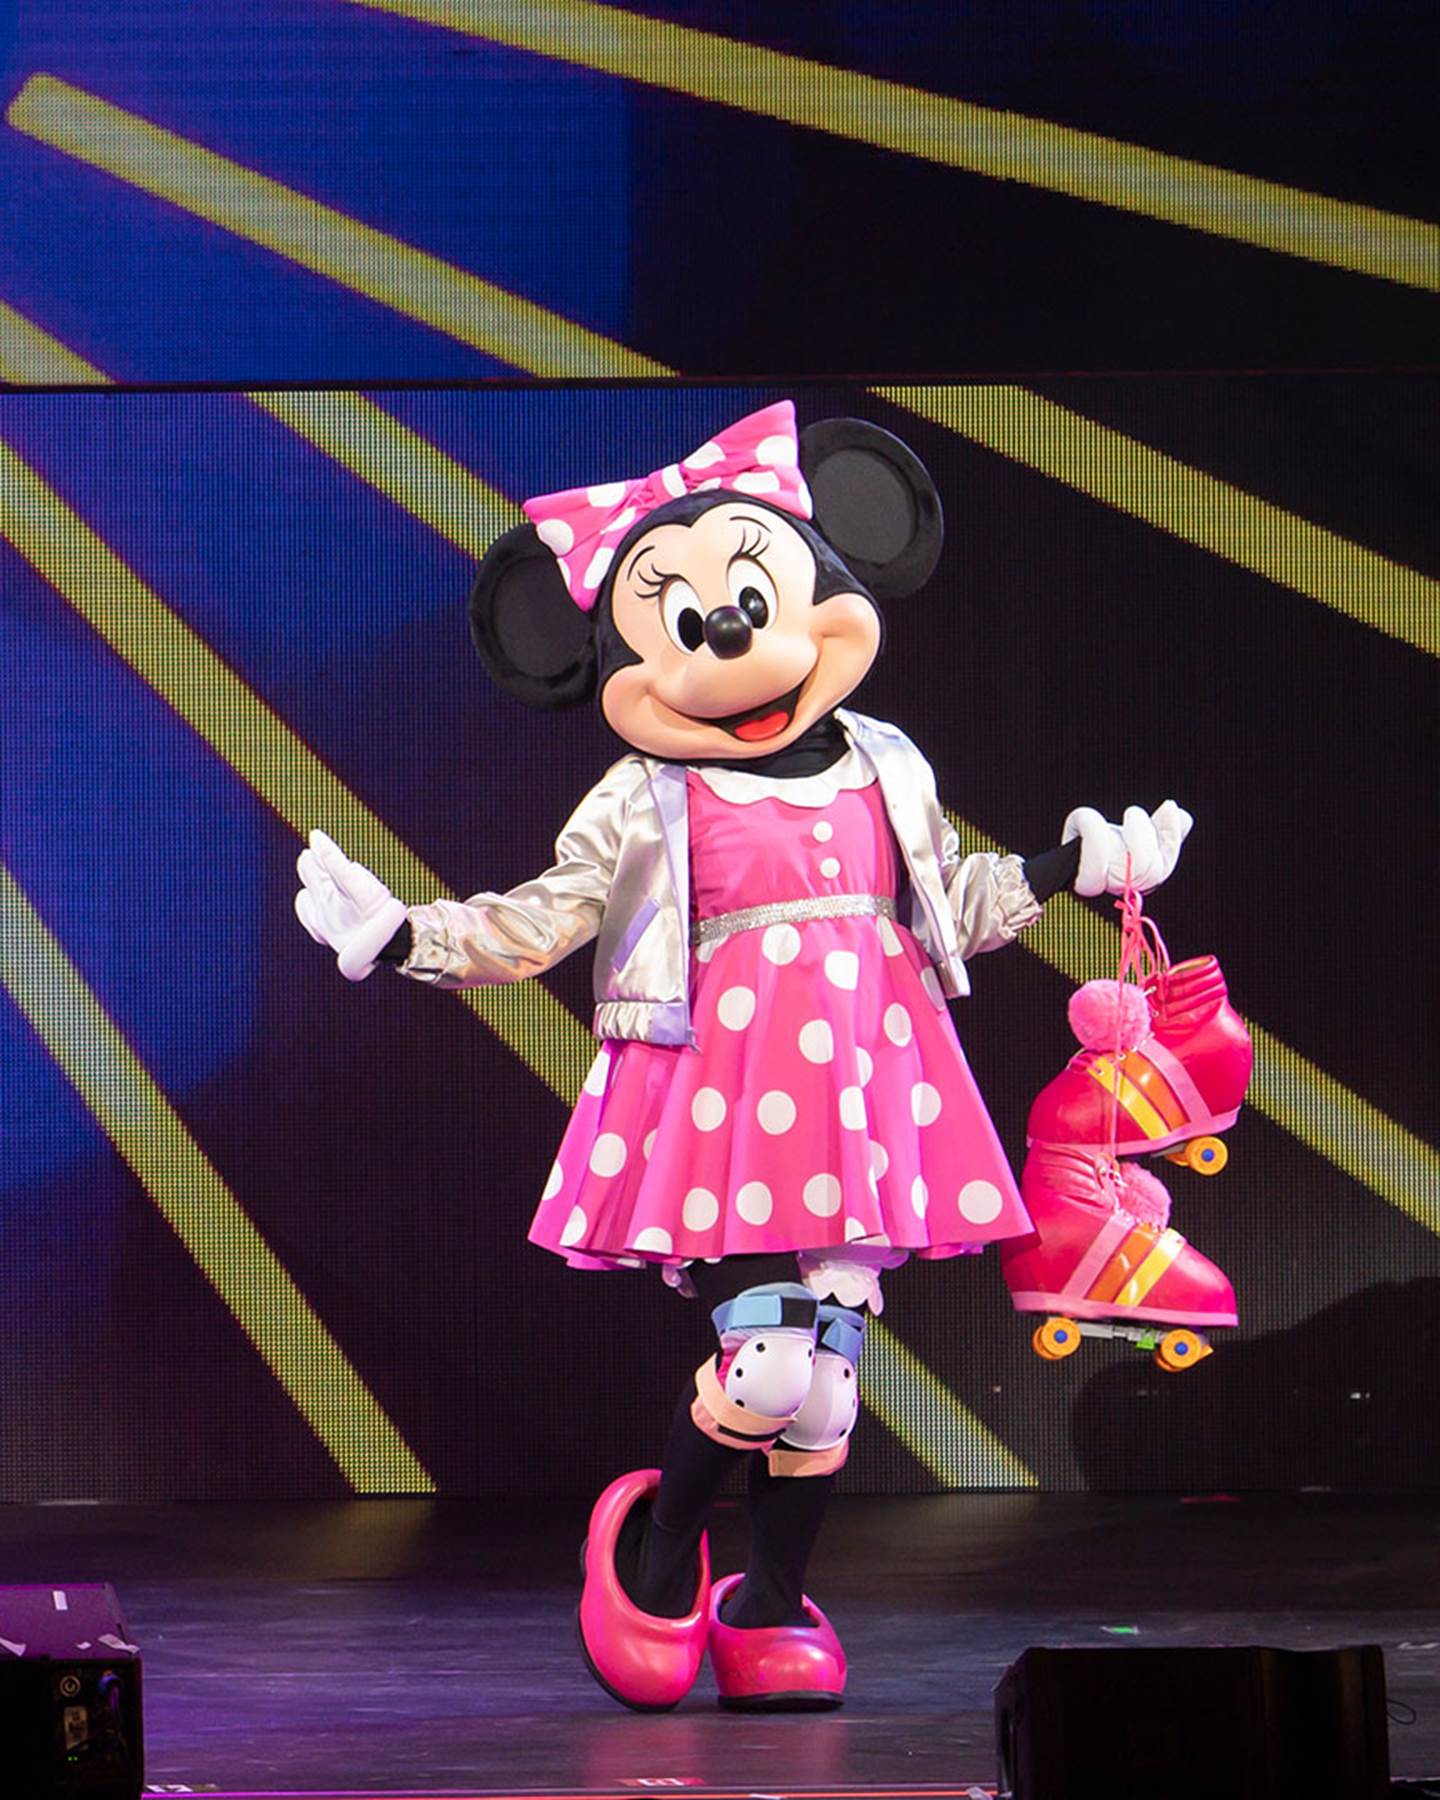 Disney Junior Live on Tour: Costume Palooza, Official Box Office